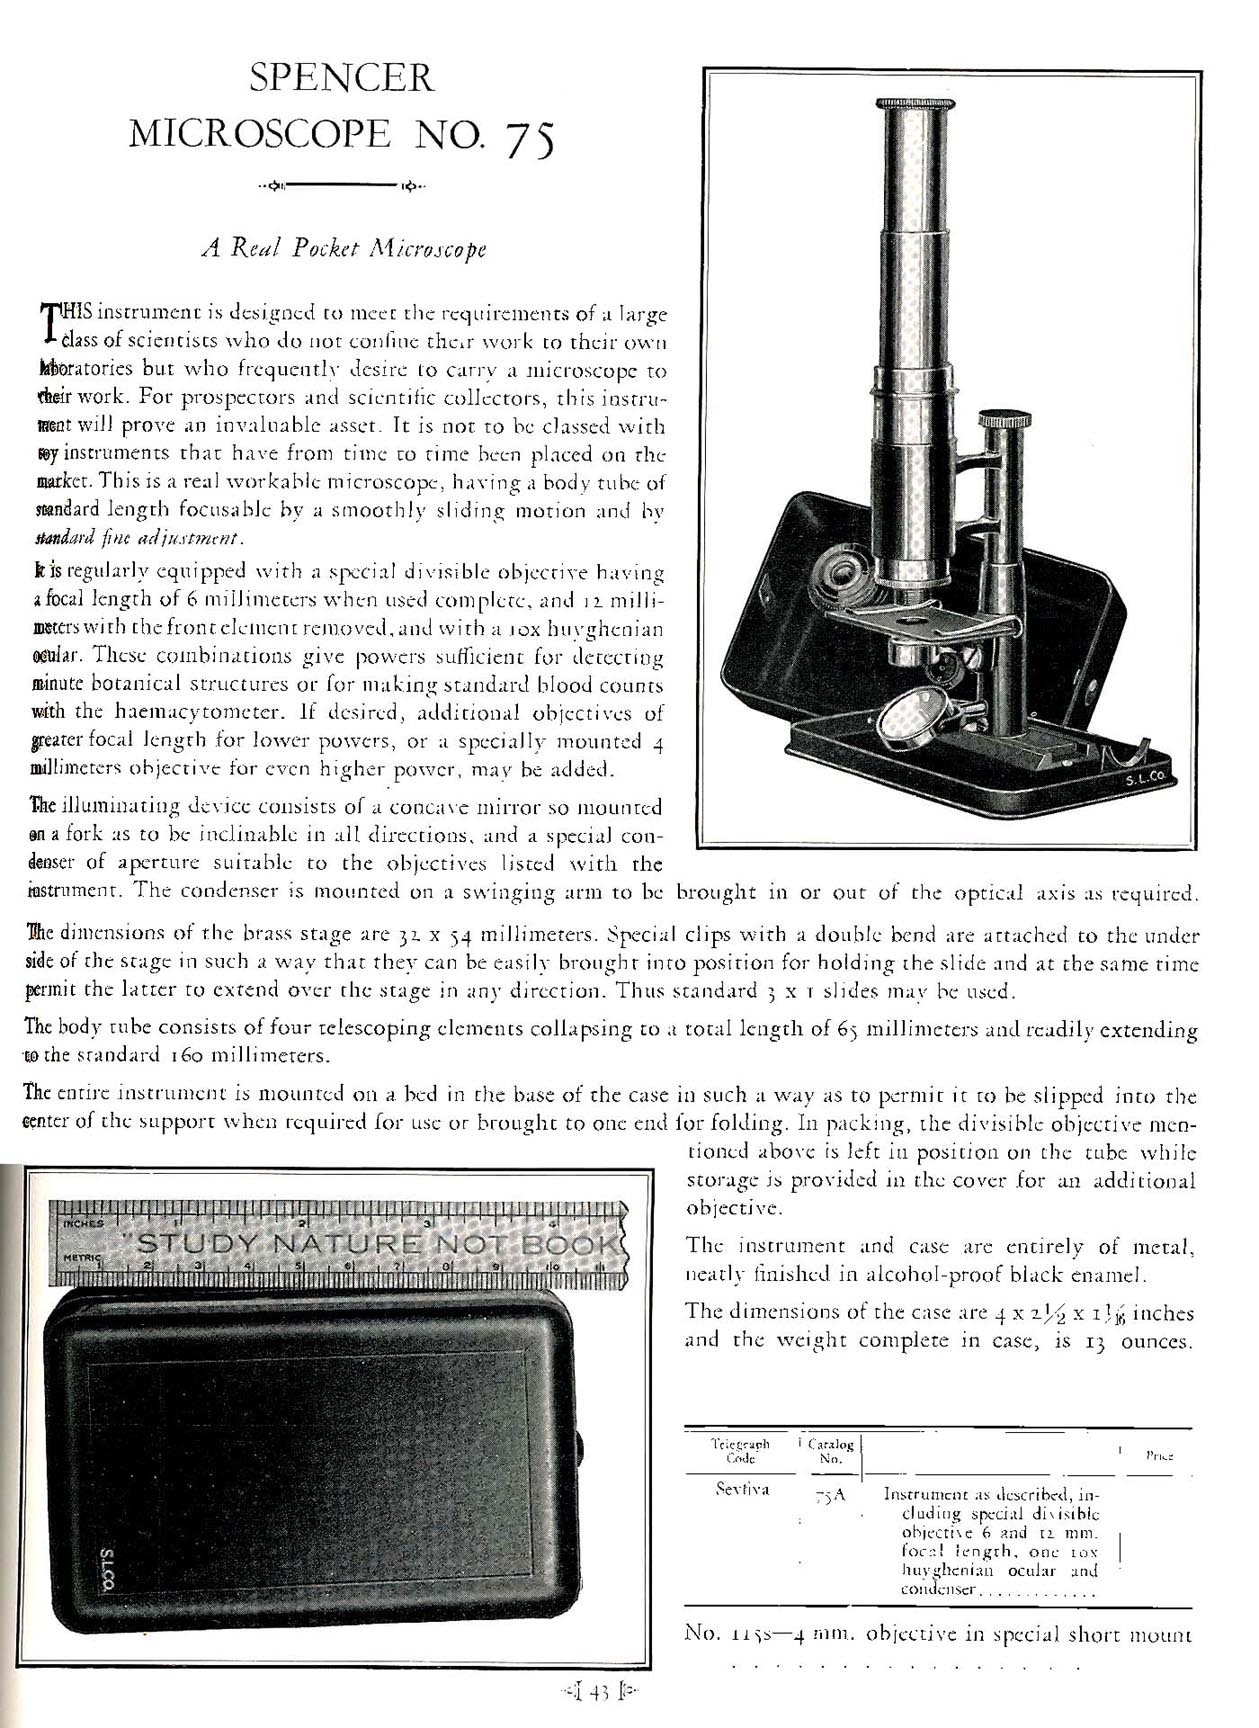 Spencer Catalog page for the Pocket Microscope